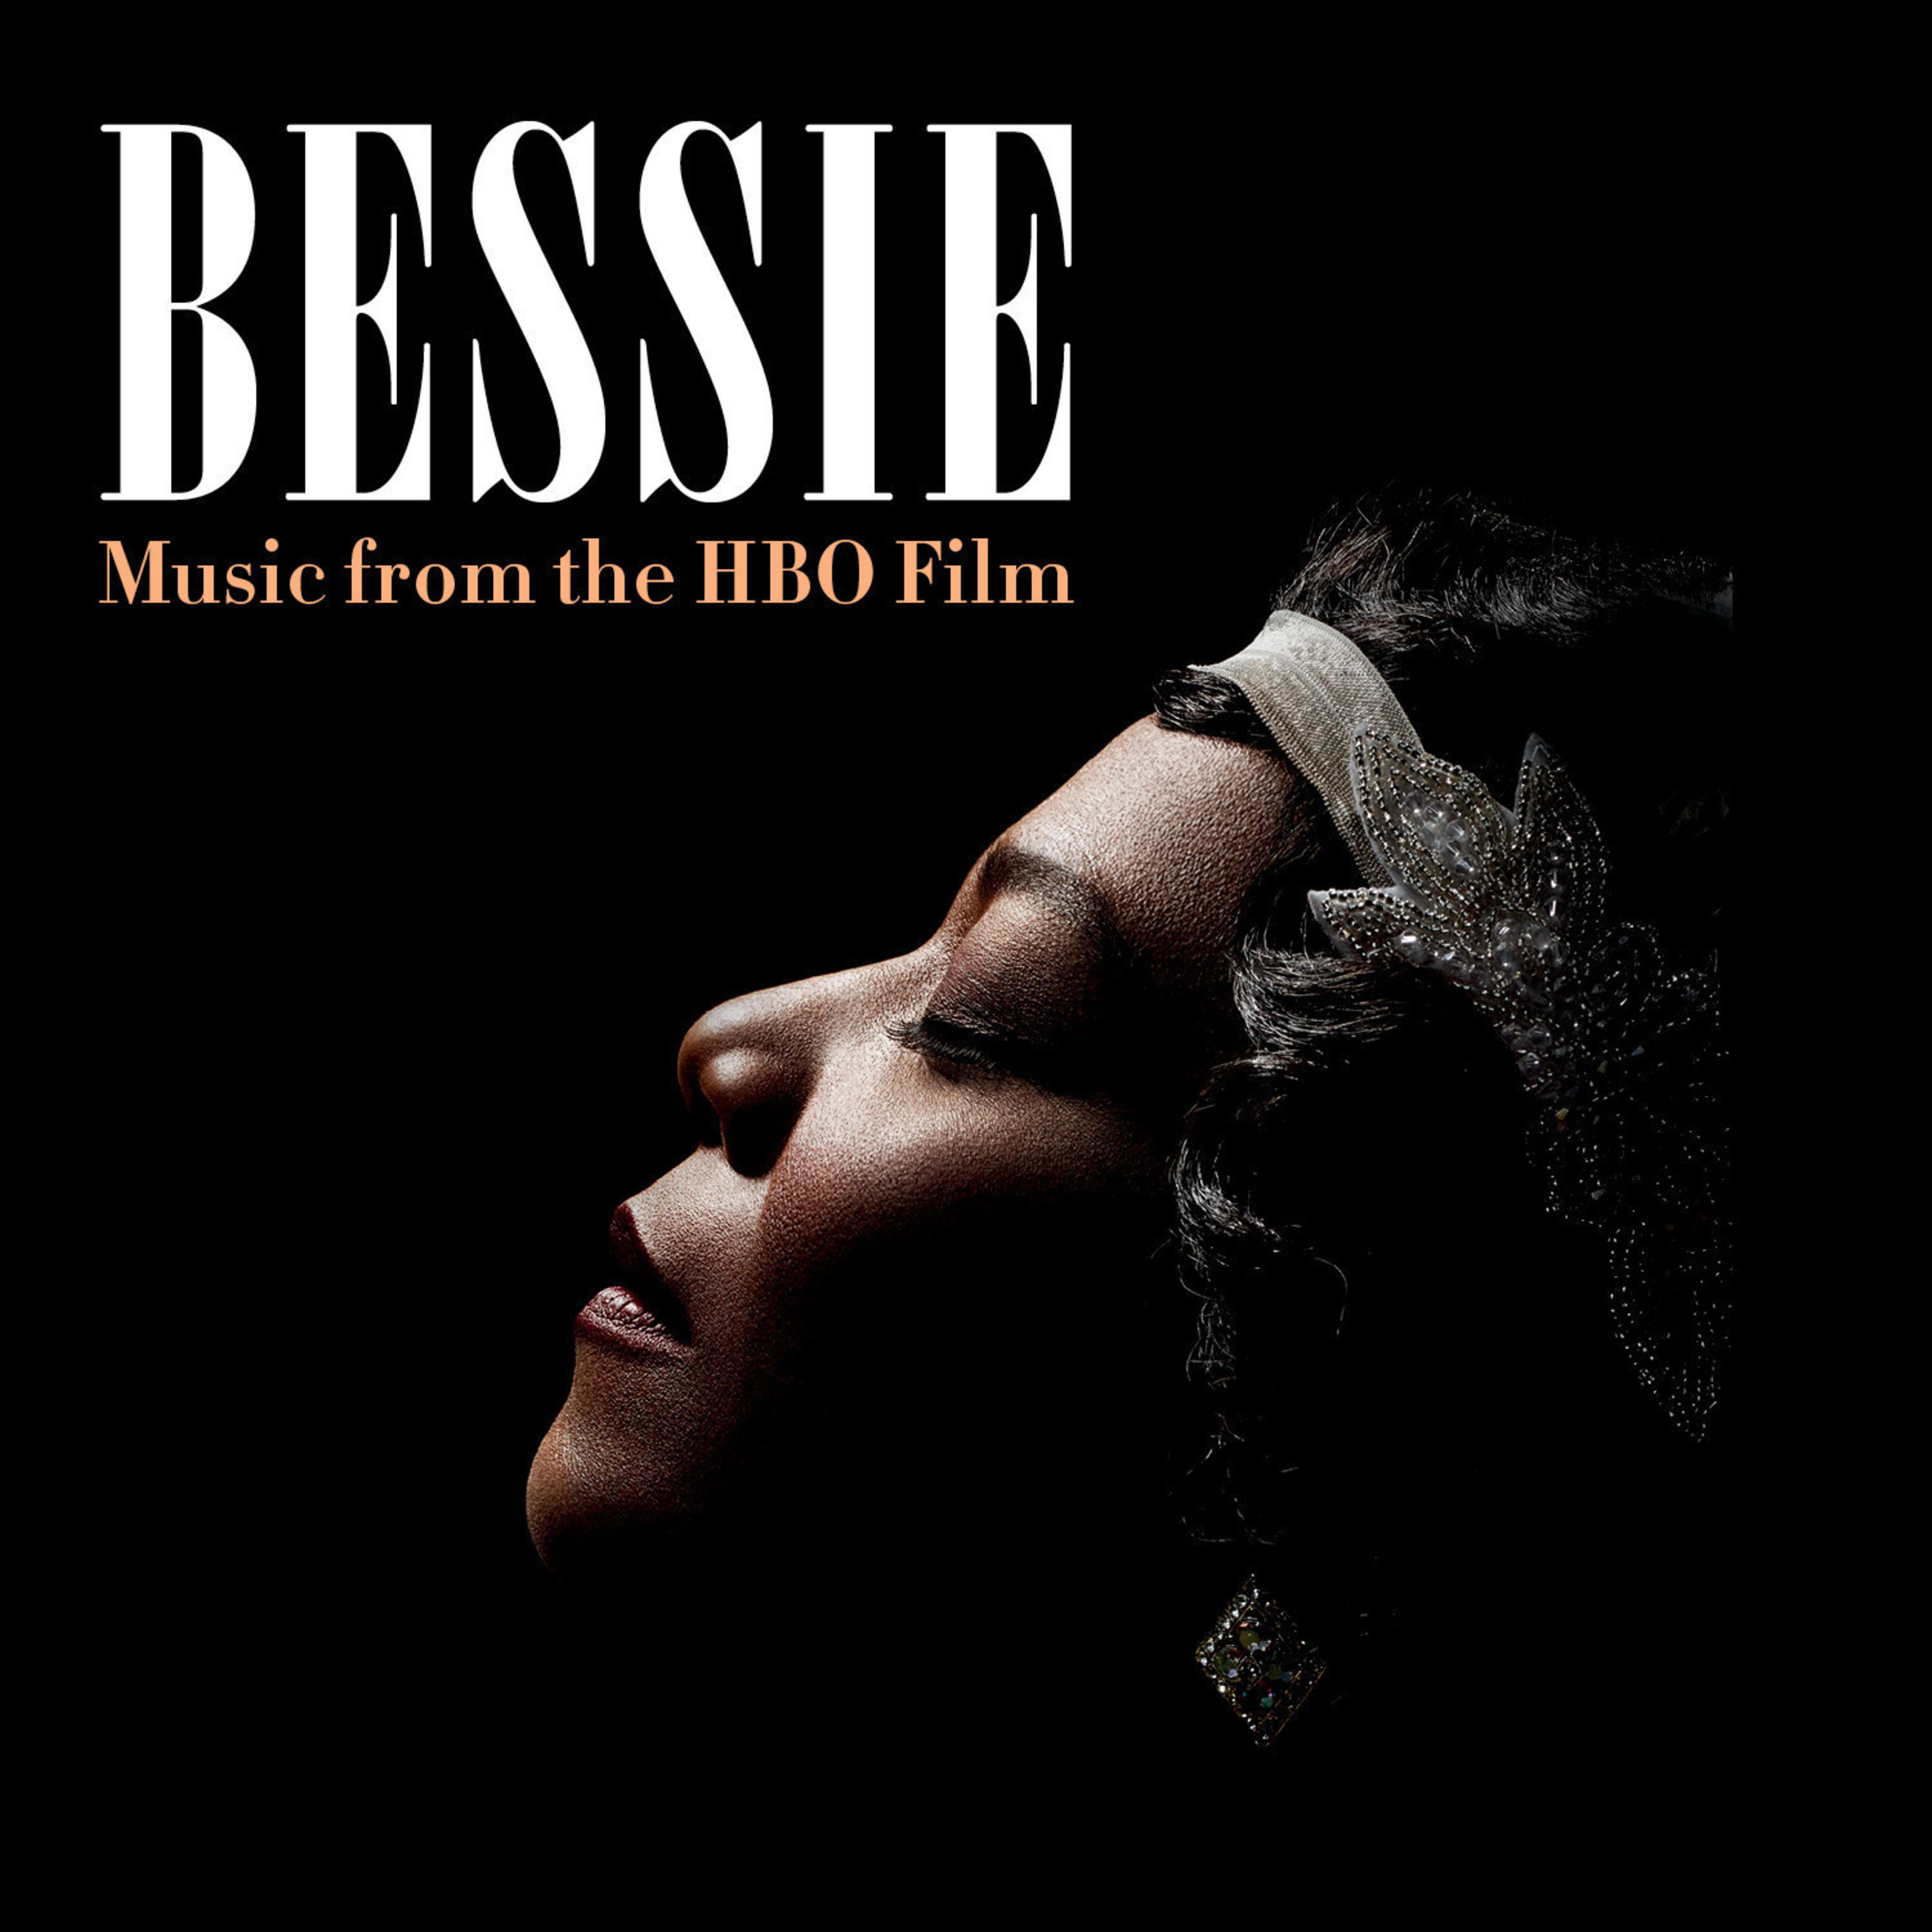 Legacy Recordings, the catalog division of Sony Music Entertainment, is proud to announce the digital release of Bessie (Music from the HBO Film) on Tuesday, May 12. The official soundtrack for the upcoming HBO film will also be released on CD on Tuesday, June 2.